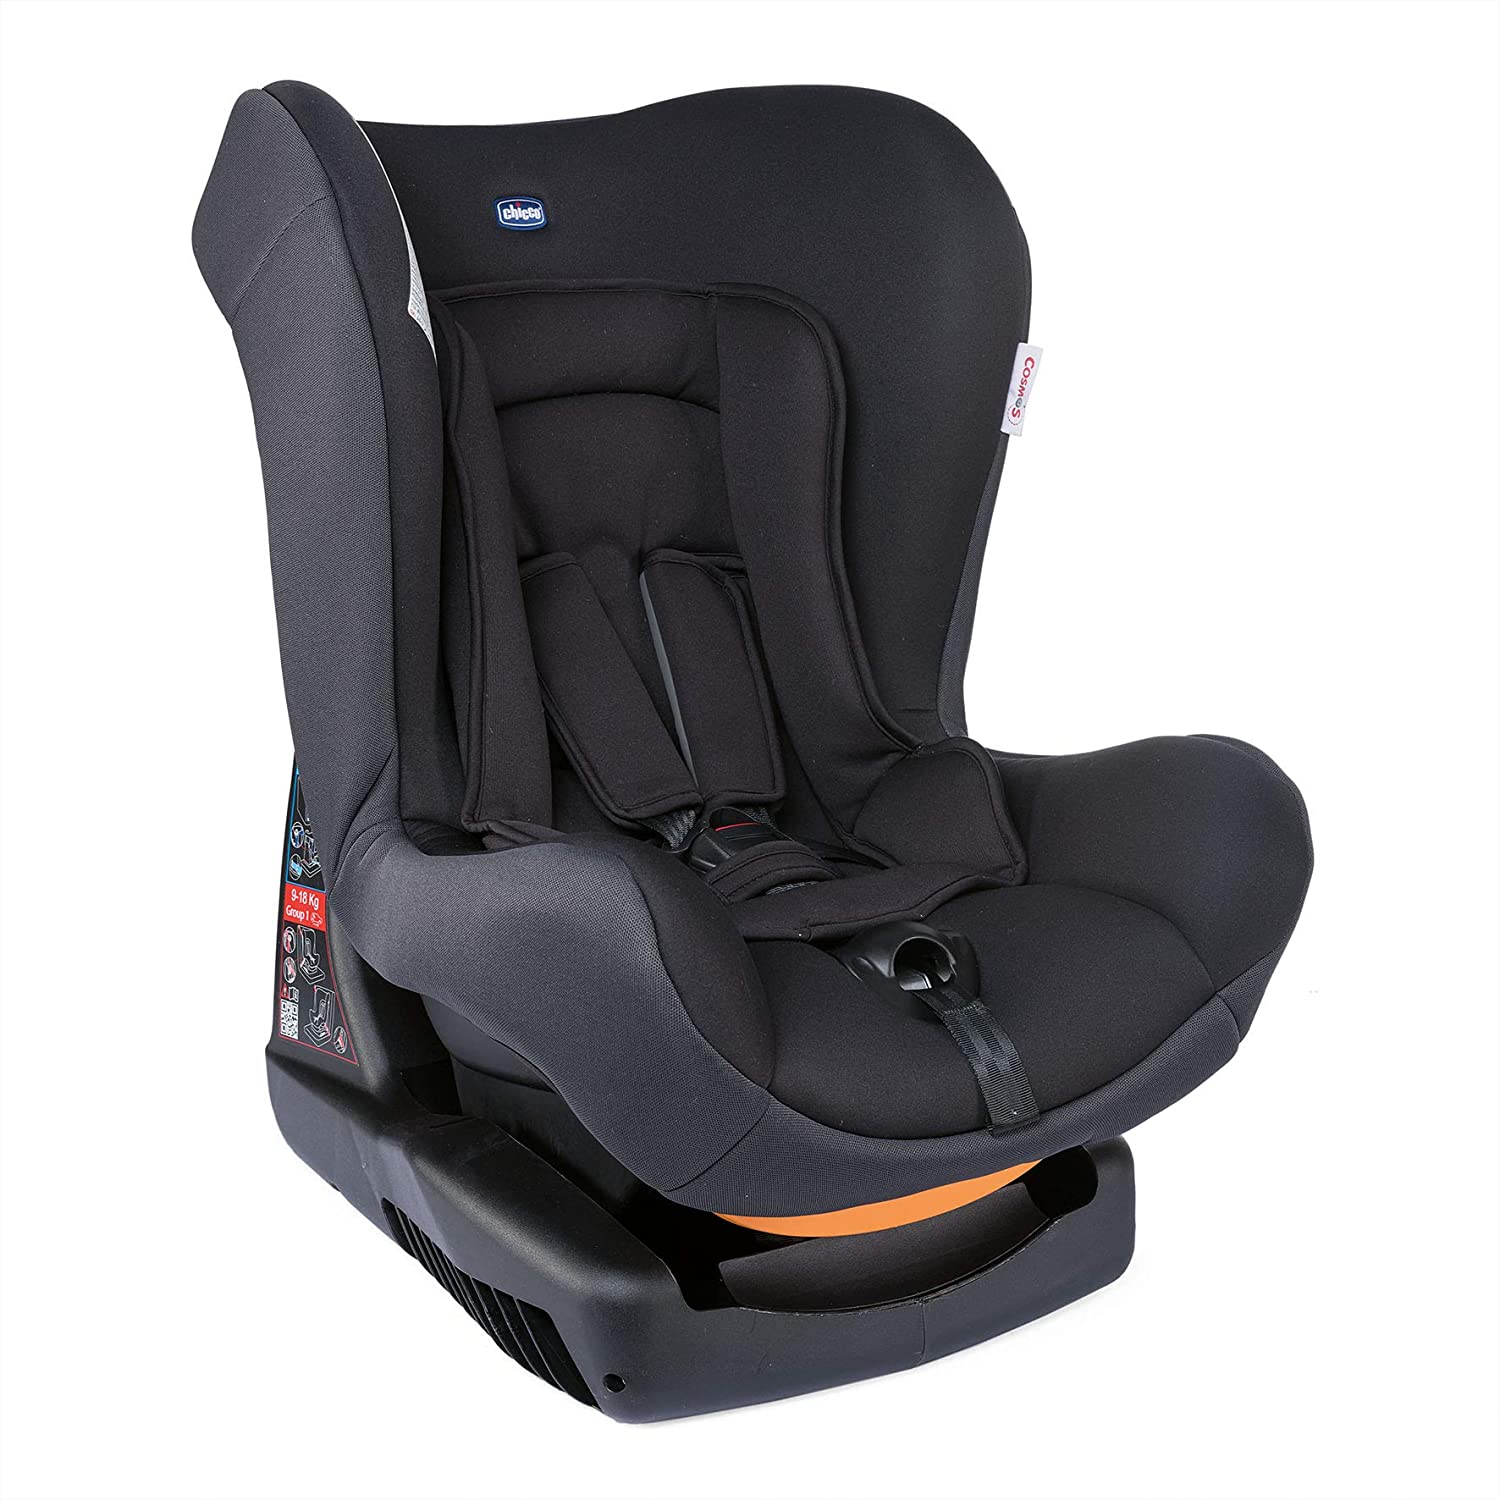 Chicco Cosmos Child Car Seat Size 0+/1 Jet Black